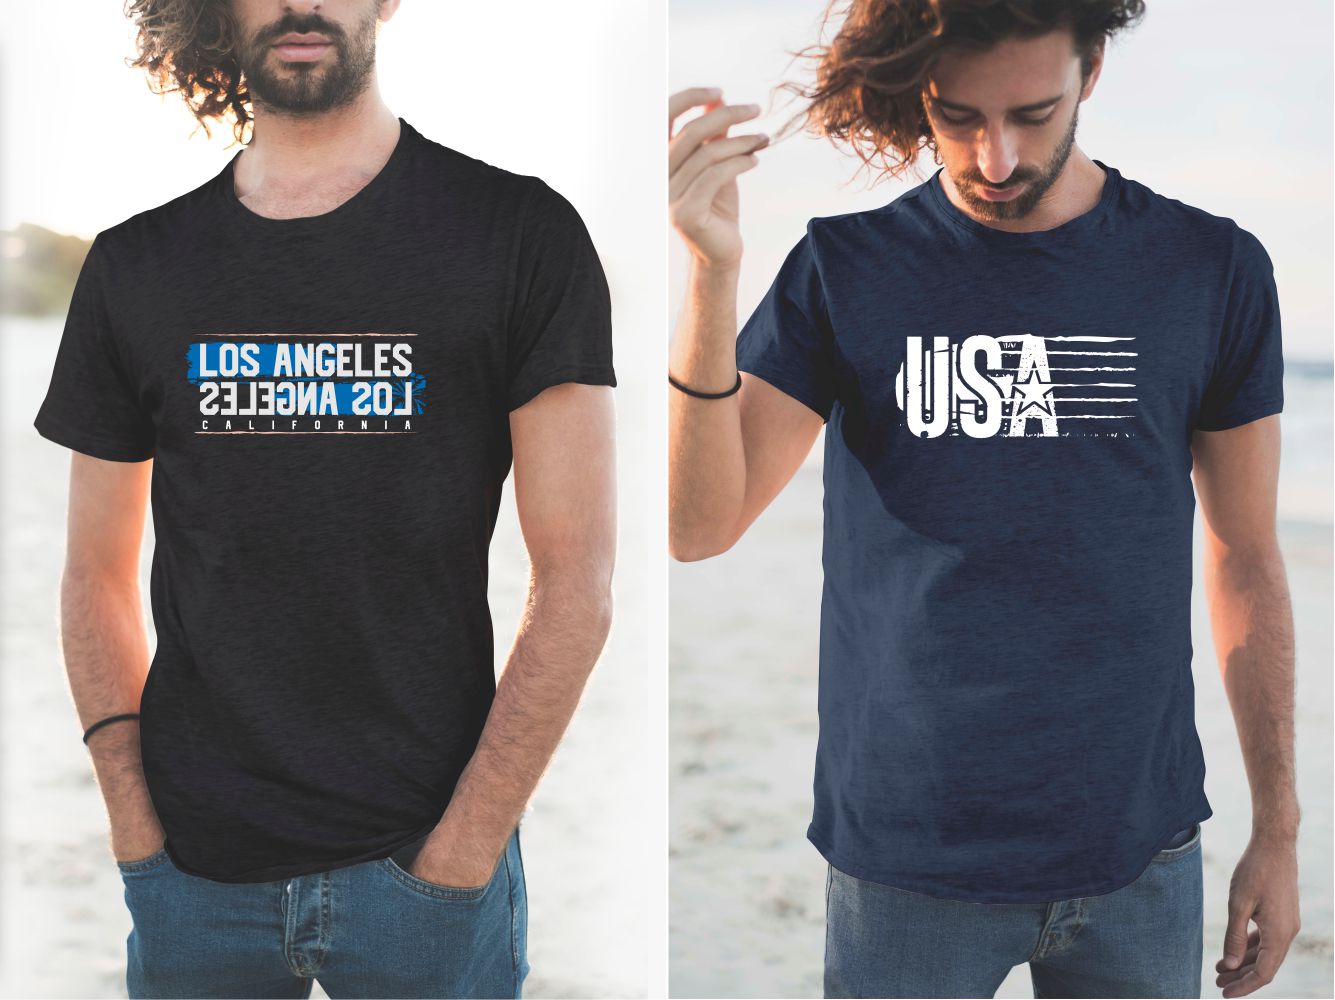 T-shirts with the Los Angeles and USA slogan.